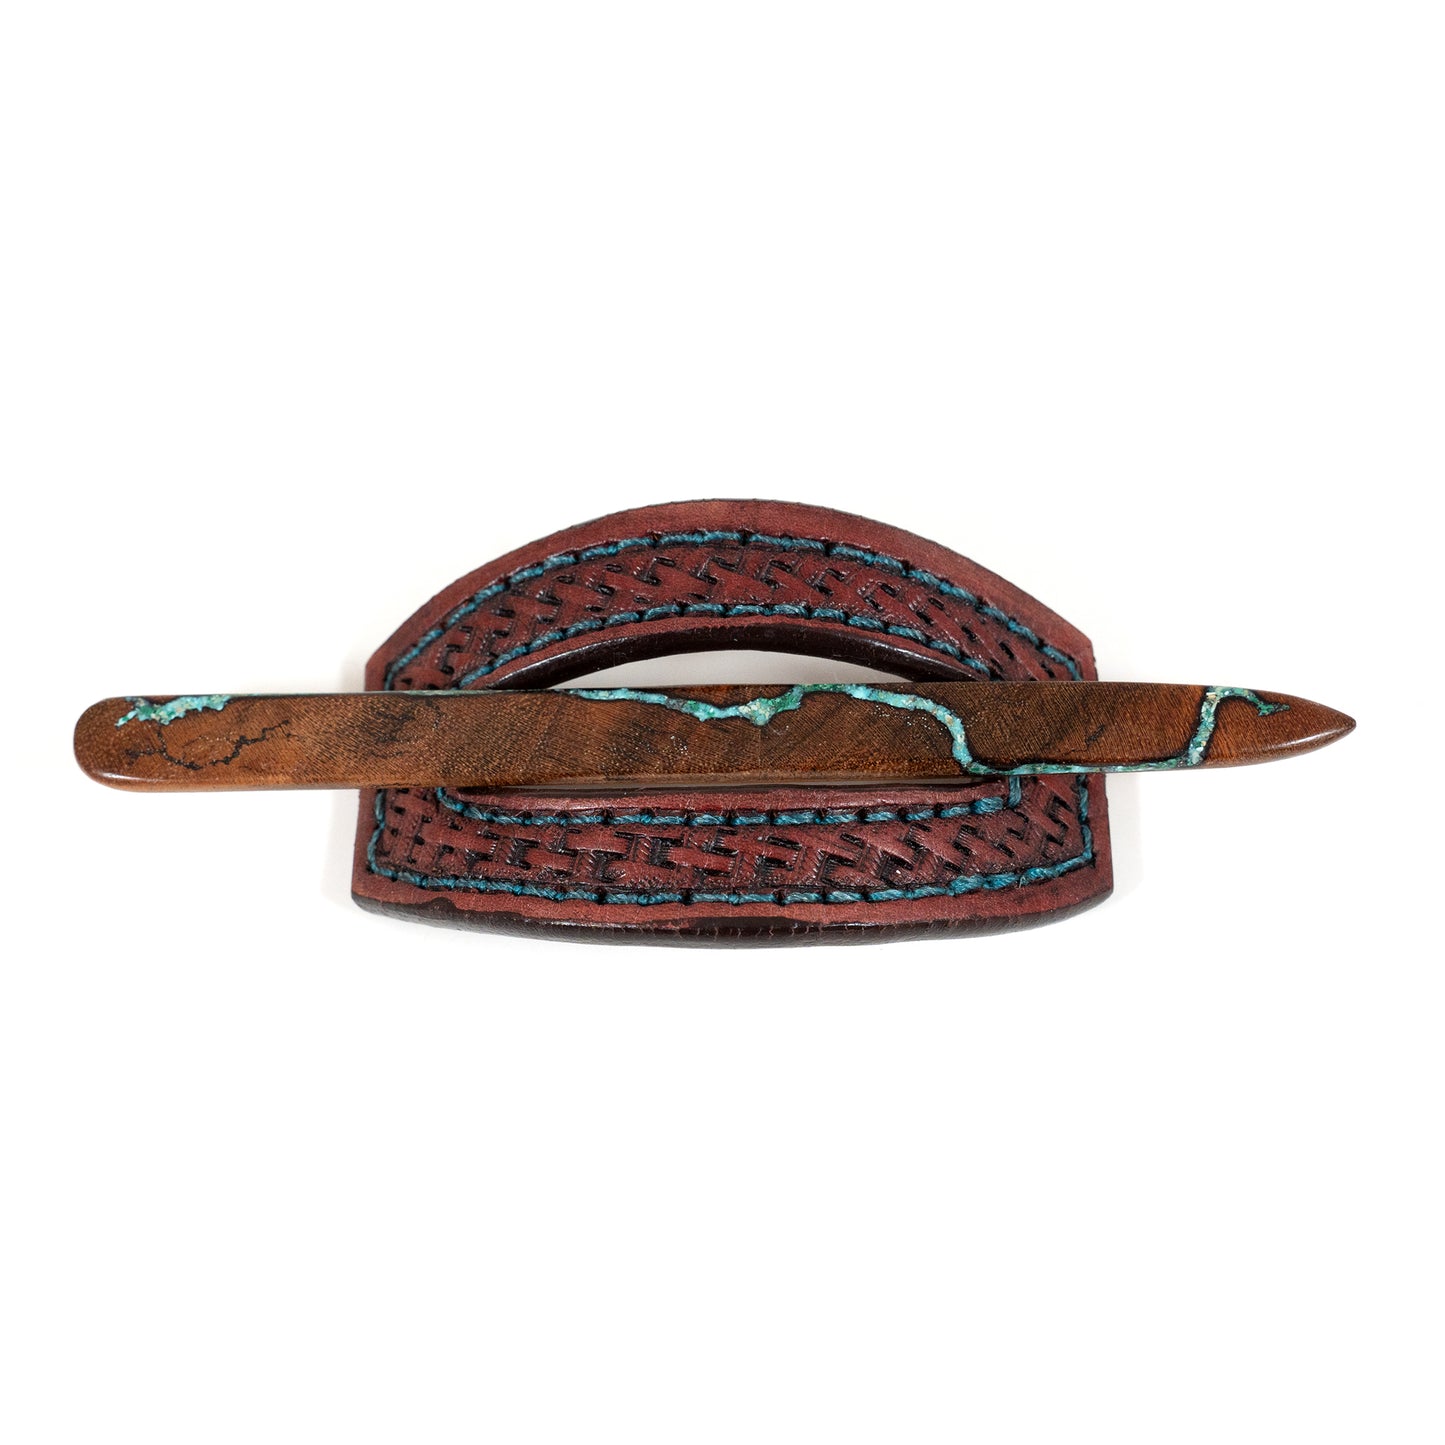 Barn Dance Basket Weave Leather Hair Barrette with Turquoise Vein Inlay Natural Wood Stick